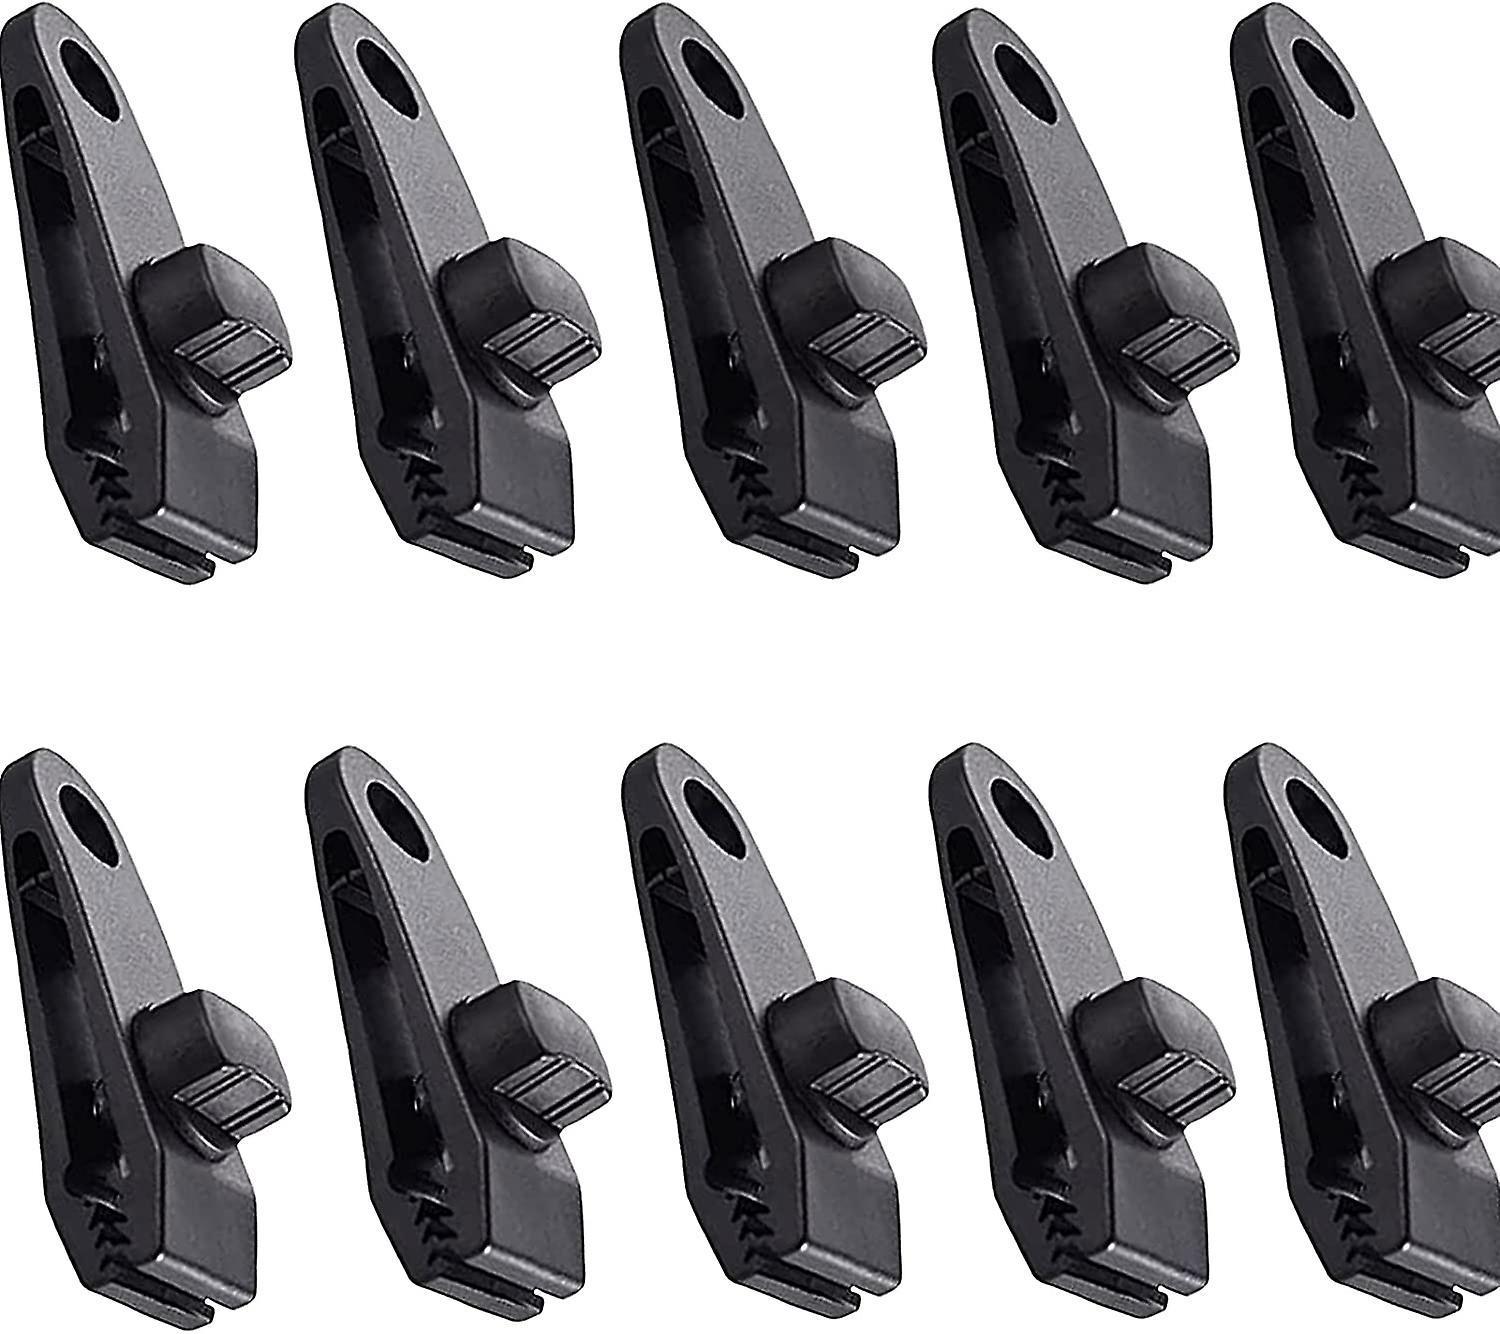 Tarp Clips 10pcs Tent Clips Awning Clips Awning Camping Tent Clips Tarp Clips Outdoor Activities Awning Black